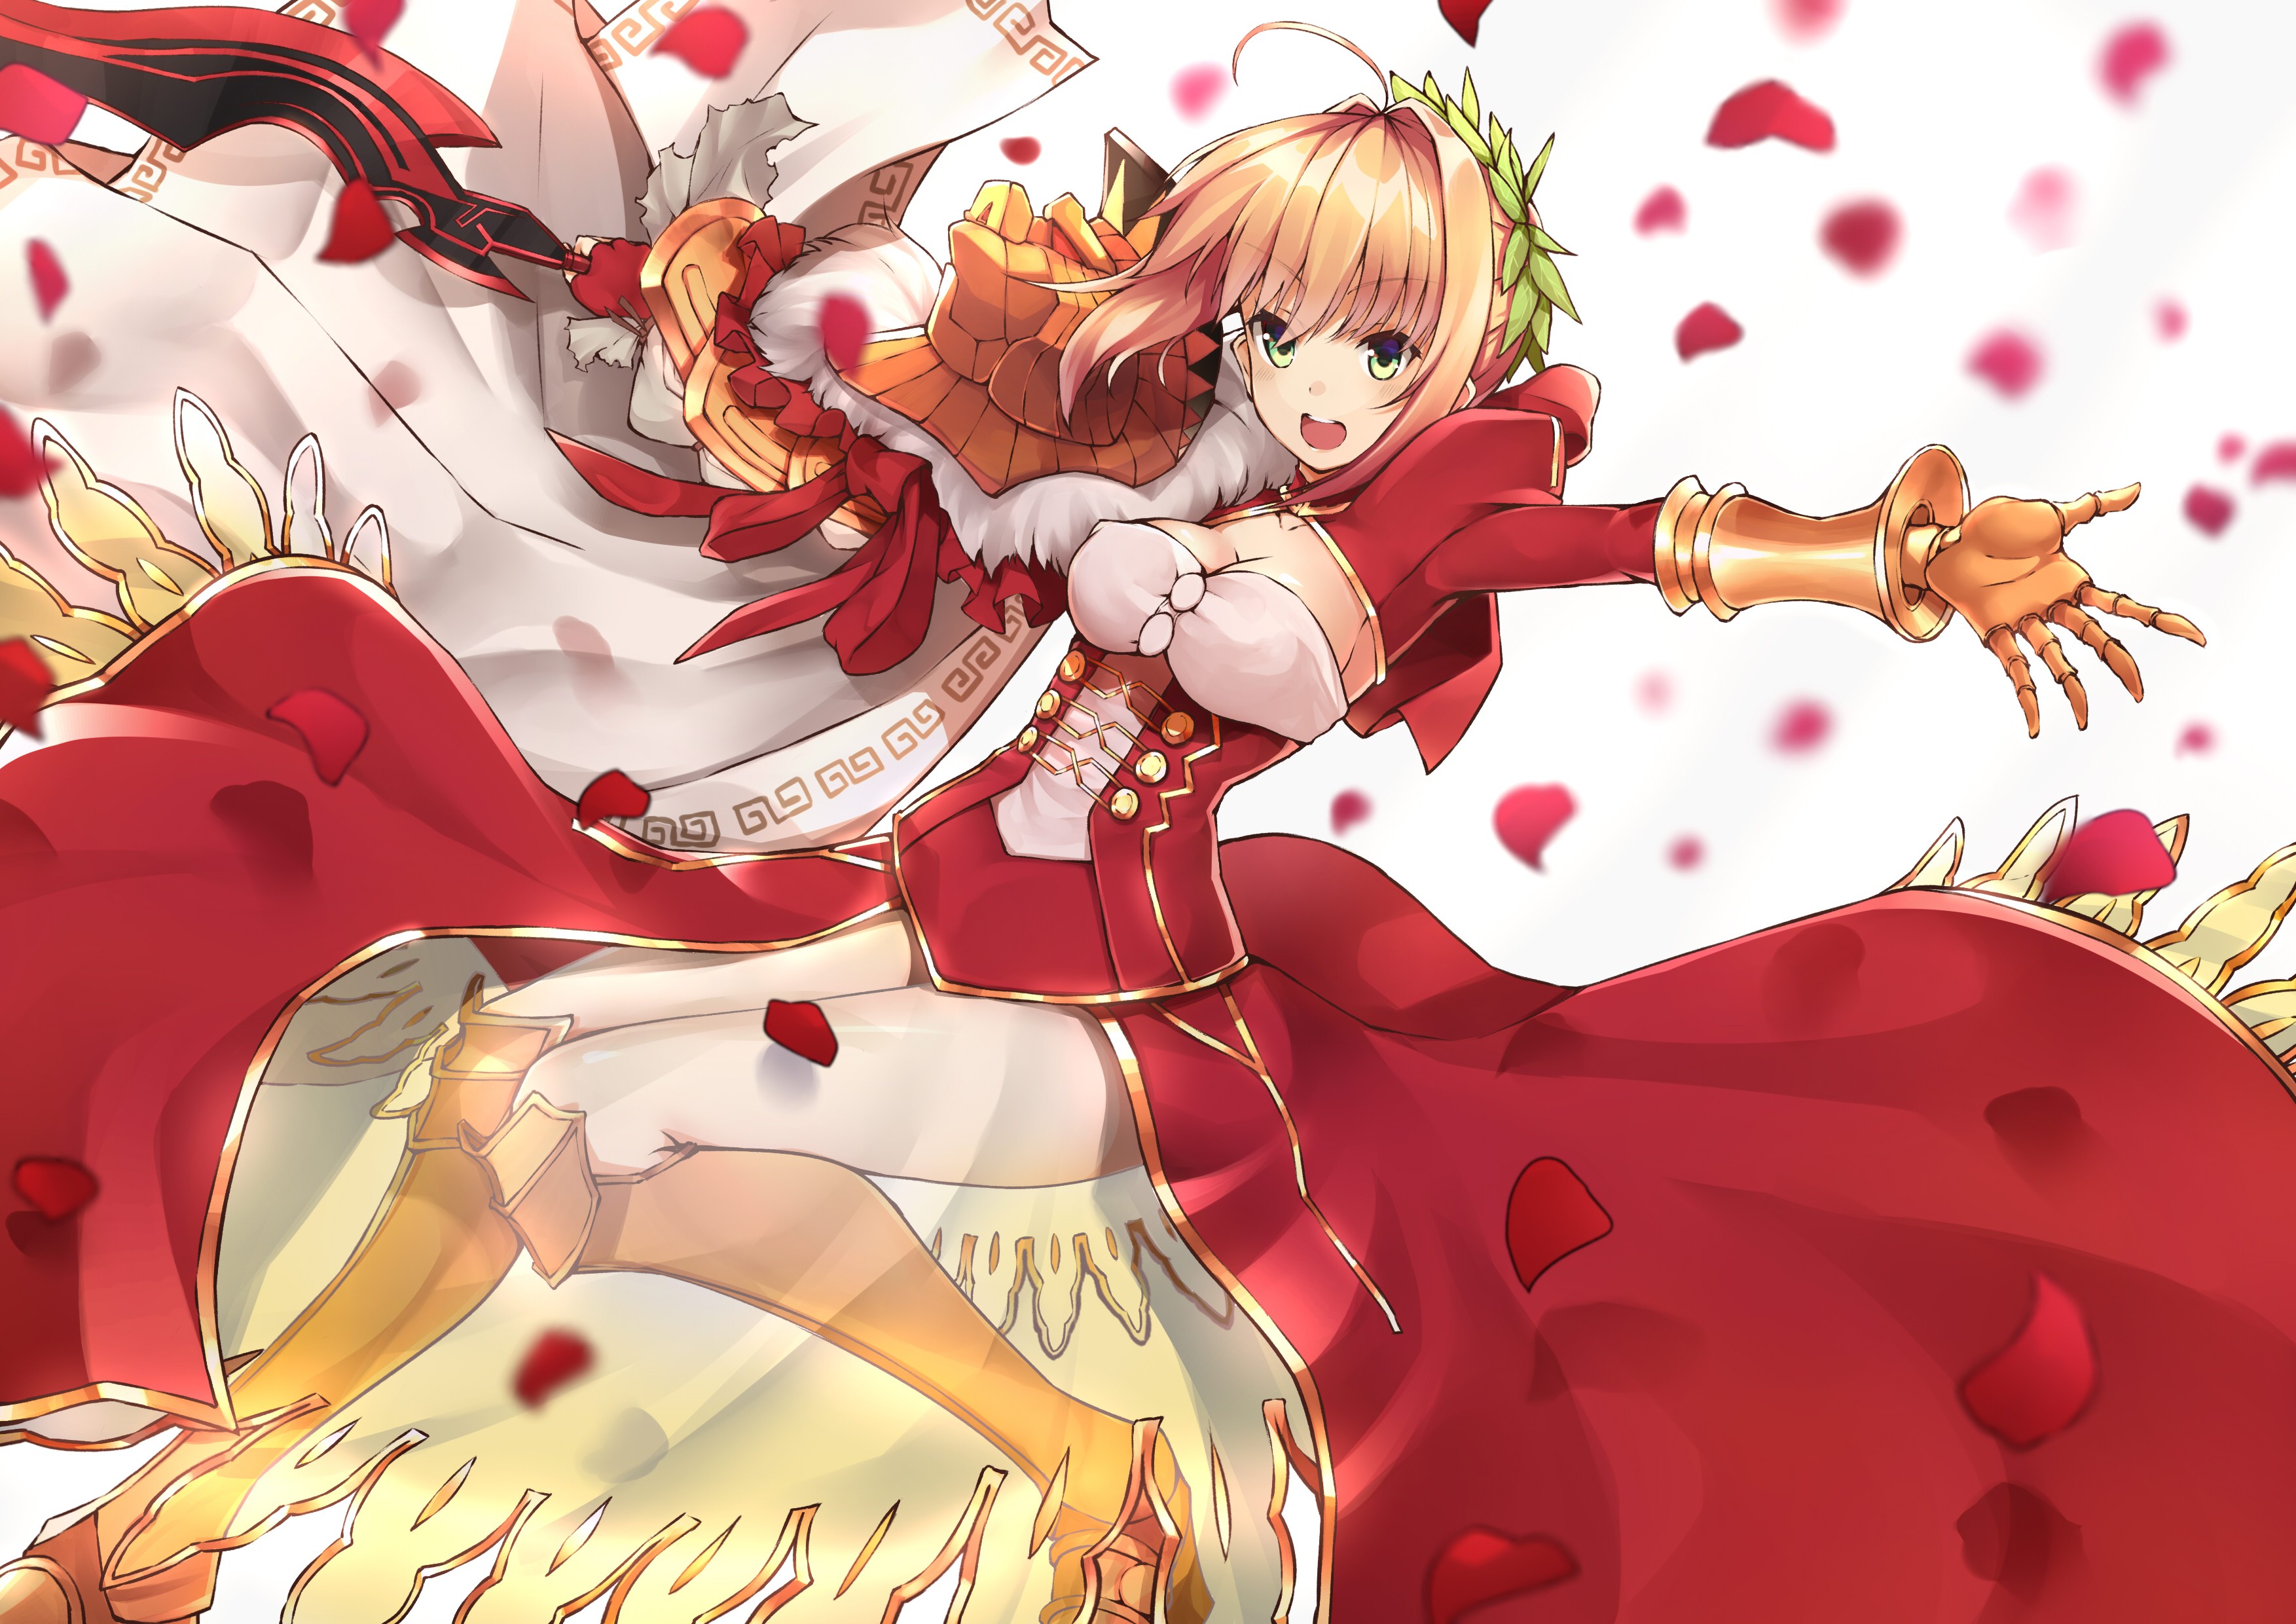 Anime 3507x2480 anime anime girls Fate/Extra armor cleavage dress heels sword blonde green eyes Fate series Nero Claudius Fate/Extra CCC Fate/Grand Order Pixiv open mouth fantasy art fantasy girl